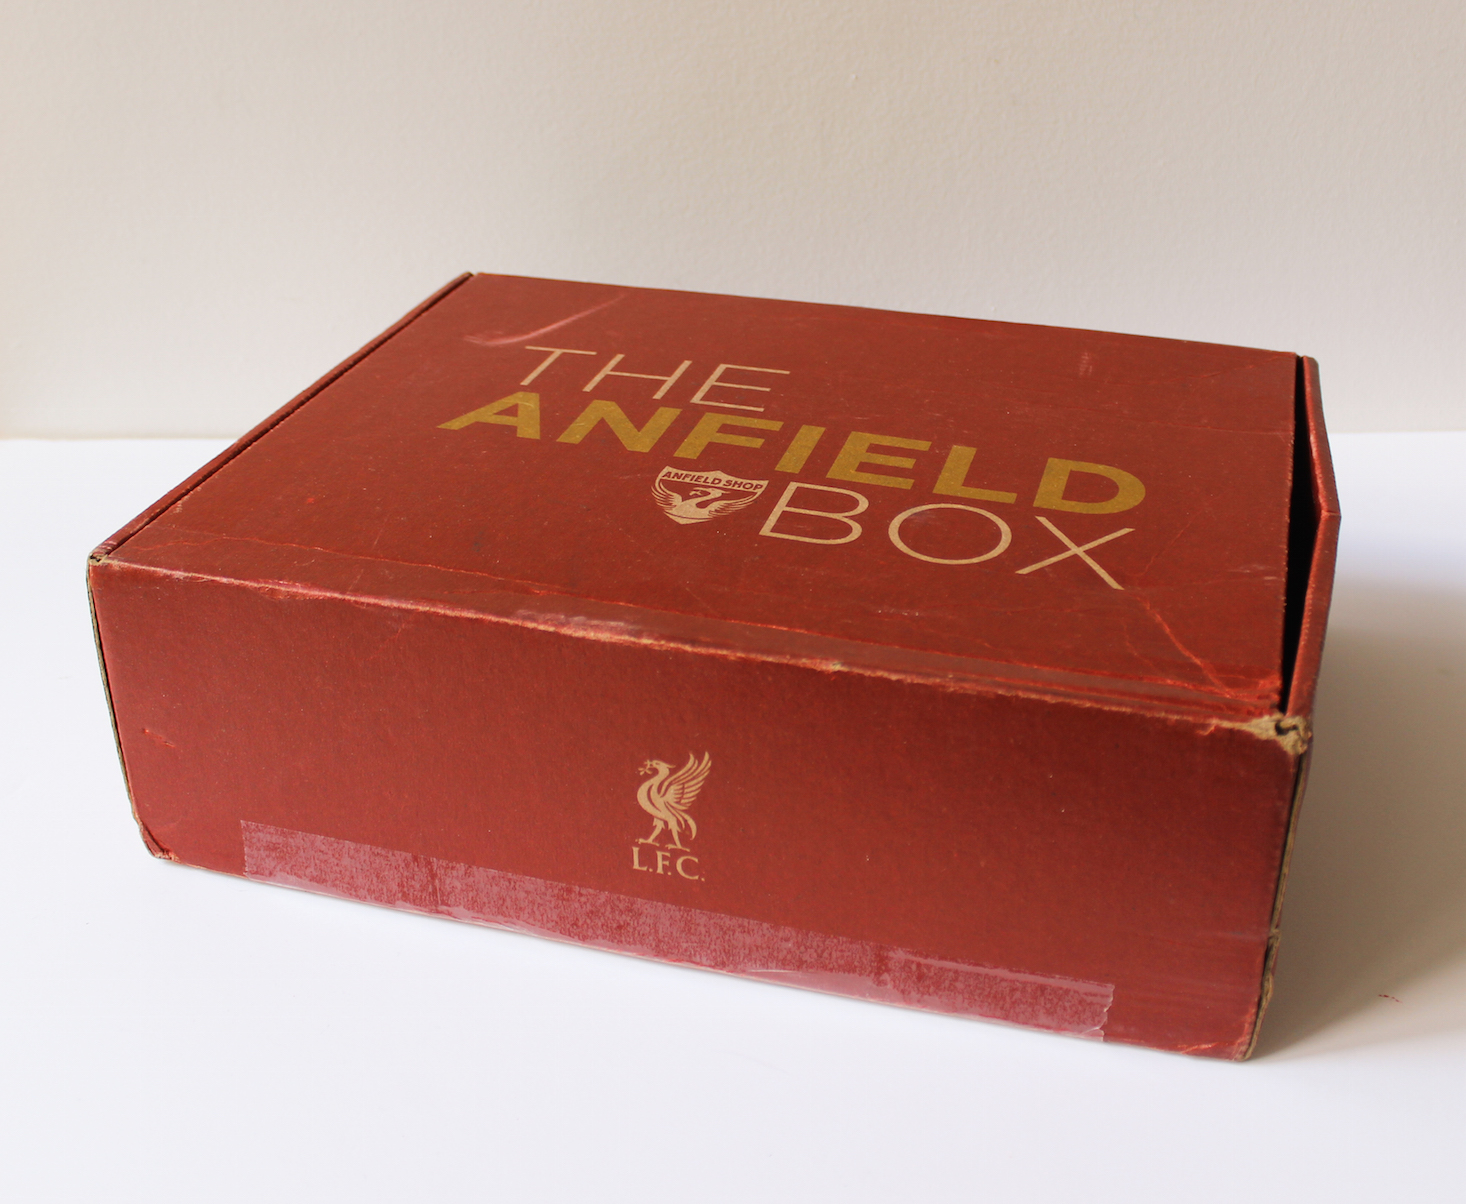 The Anfield Box Subscription Box Review – Summer 2016